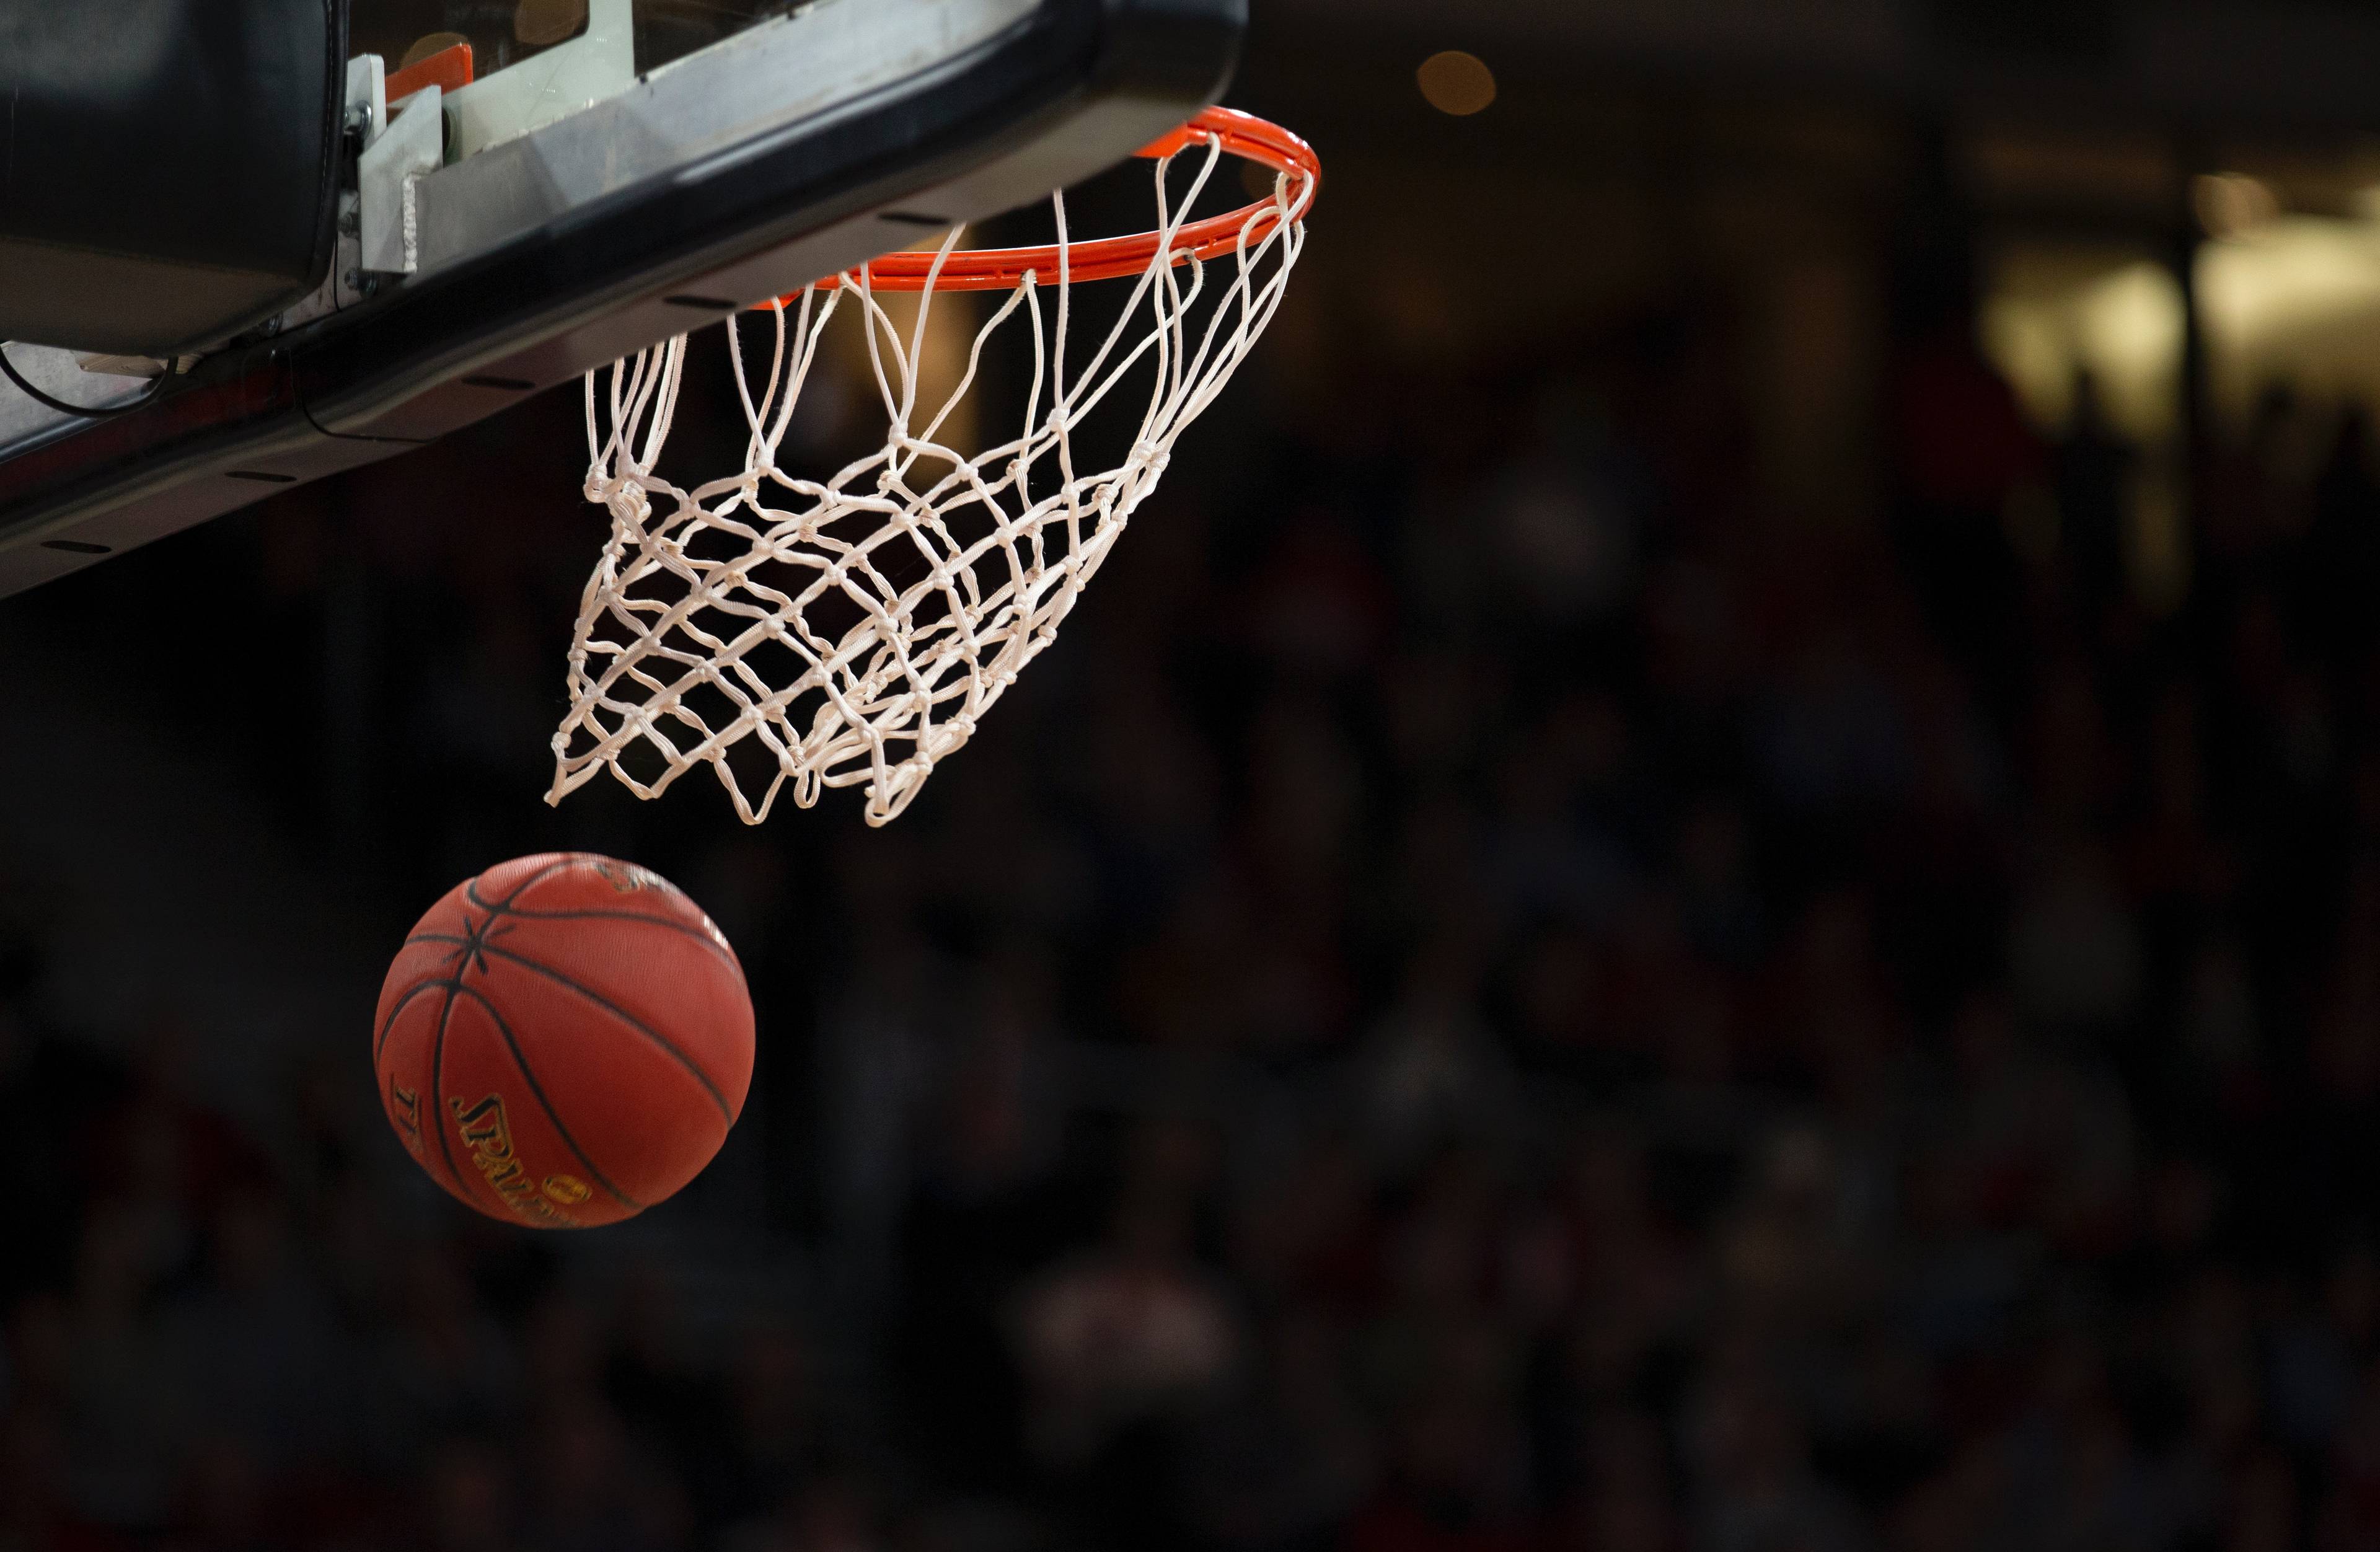 Backboards & Dashboards: Using analytics to understand sports performance